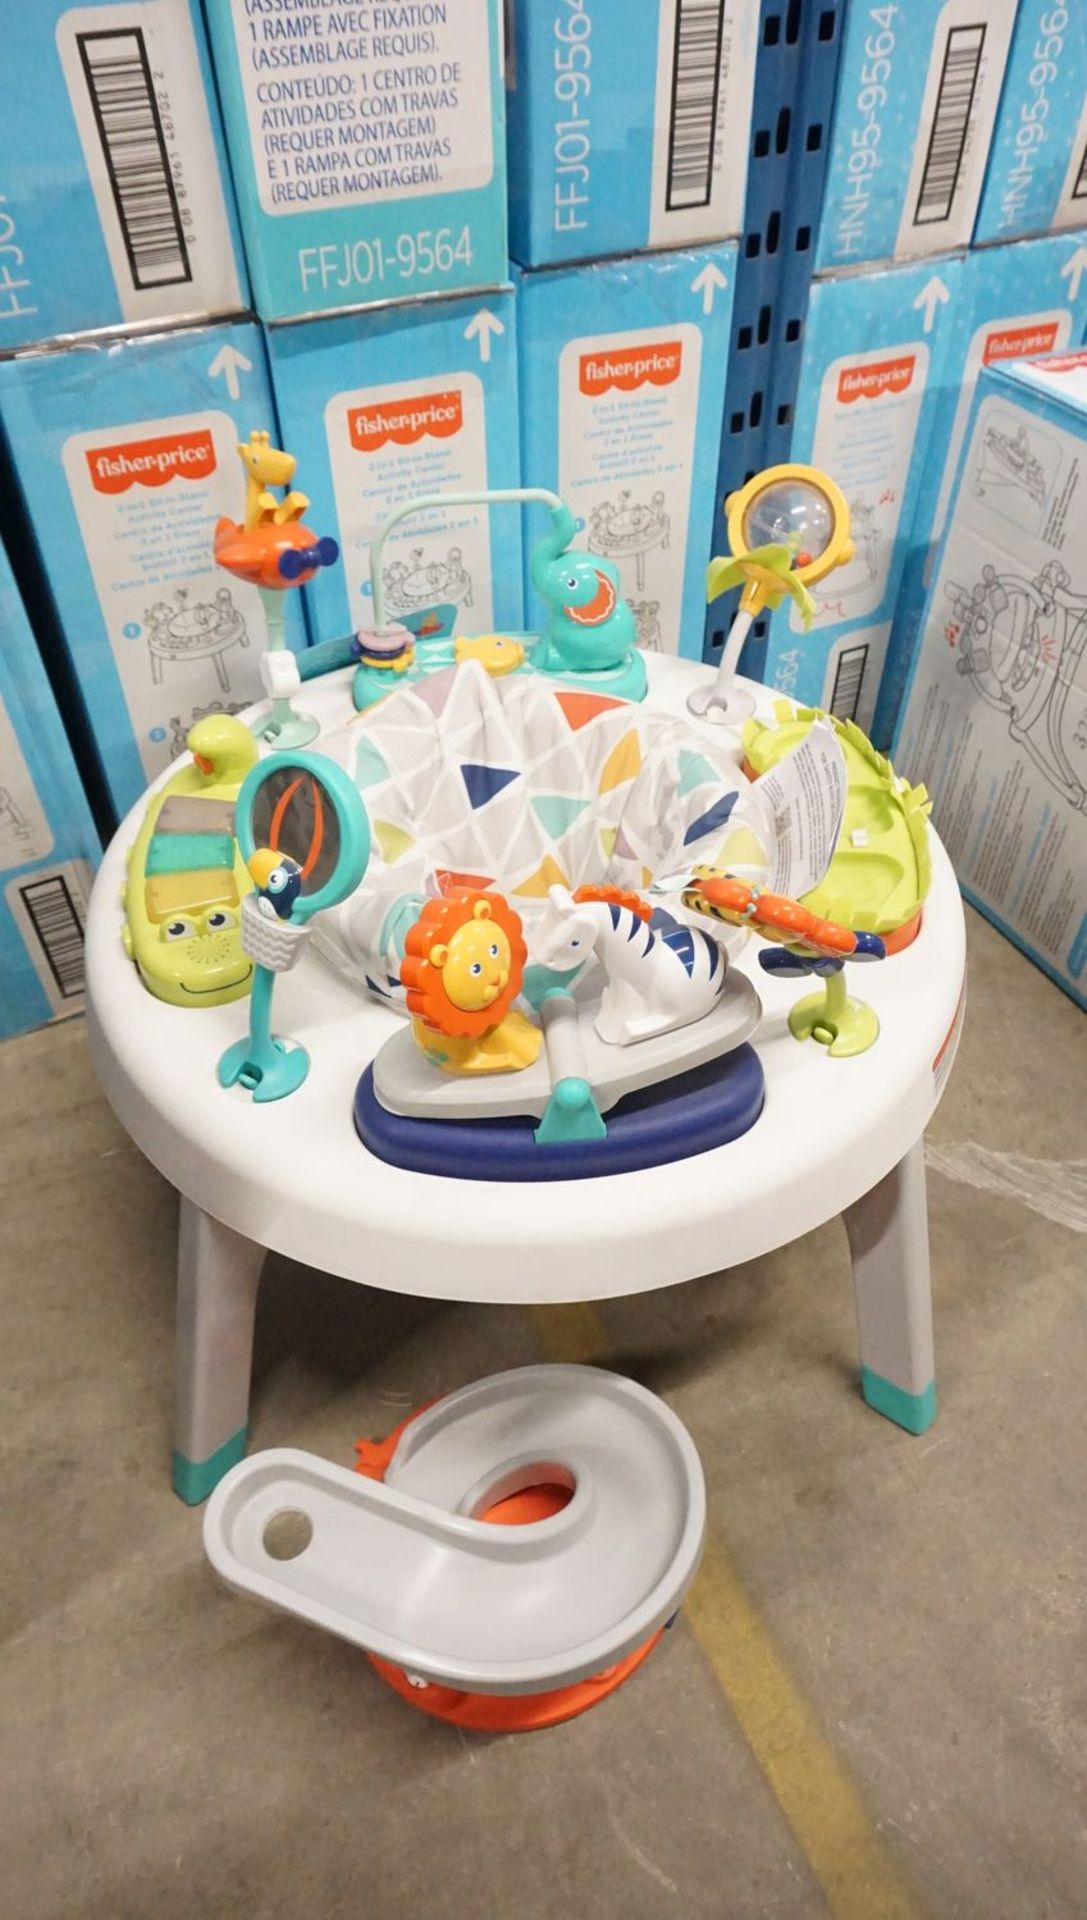 UNITS - FISHER PRICE 2-IN-1 SIT & STAND ACTIVITY CENTRE (FFJ01-9564) (MSRP 129.99) - Image 2 of 2